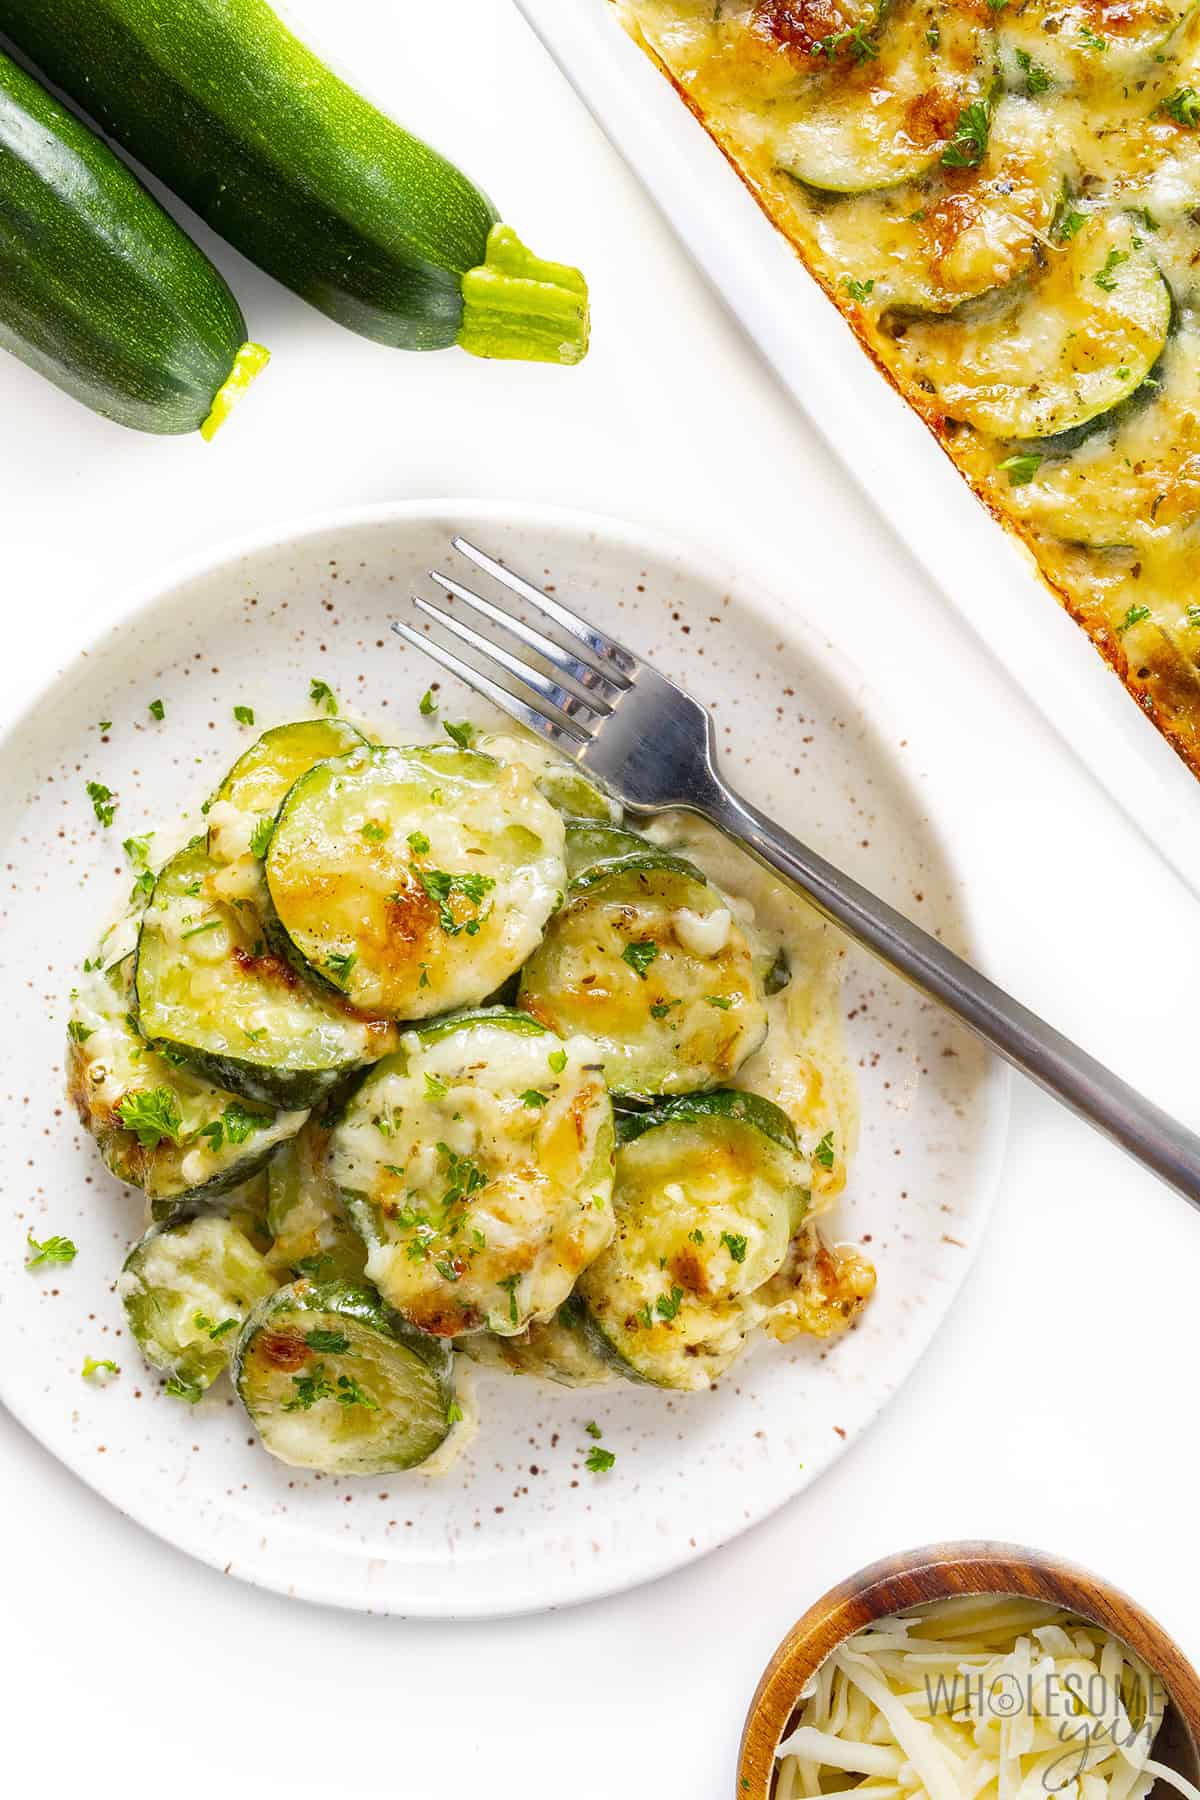 Zucchini casserole plated with a fork.